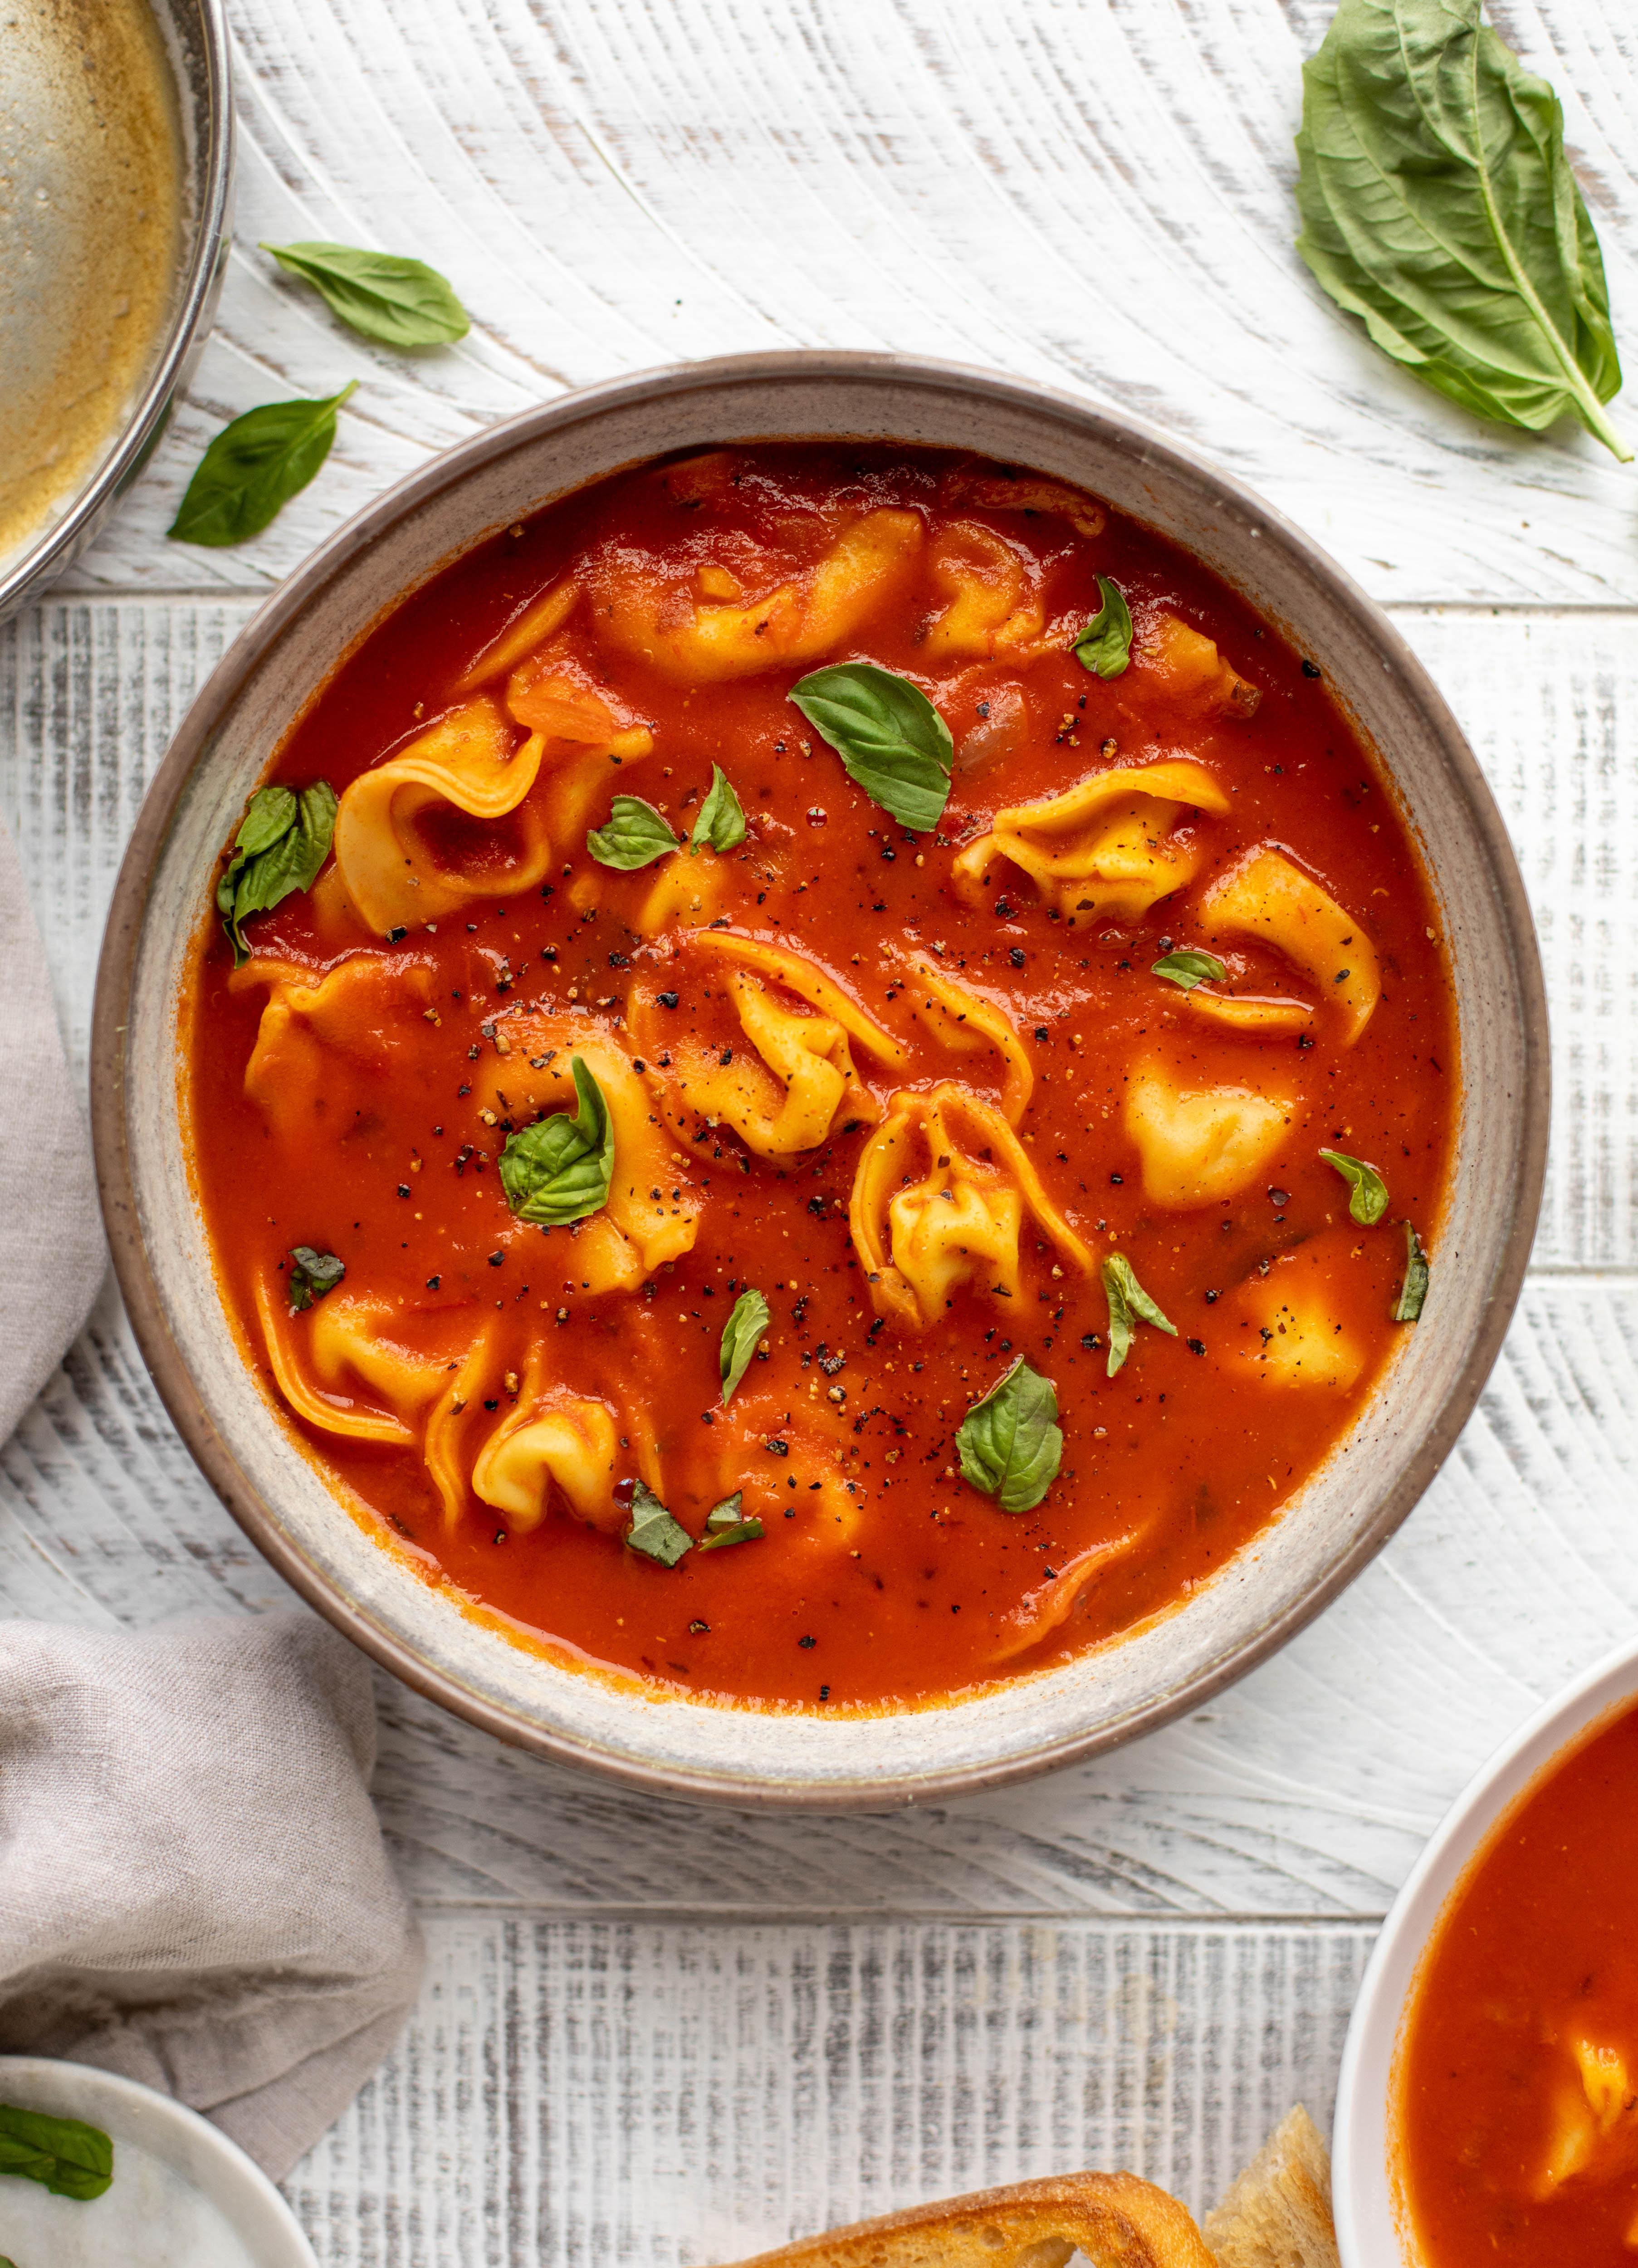 This curried tomato tortellini soup has so much flavor! Serve with cheesy tortellini and brown butter garlic toasts for the perfect weeknight meal.